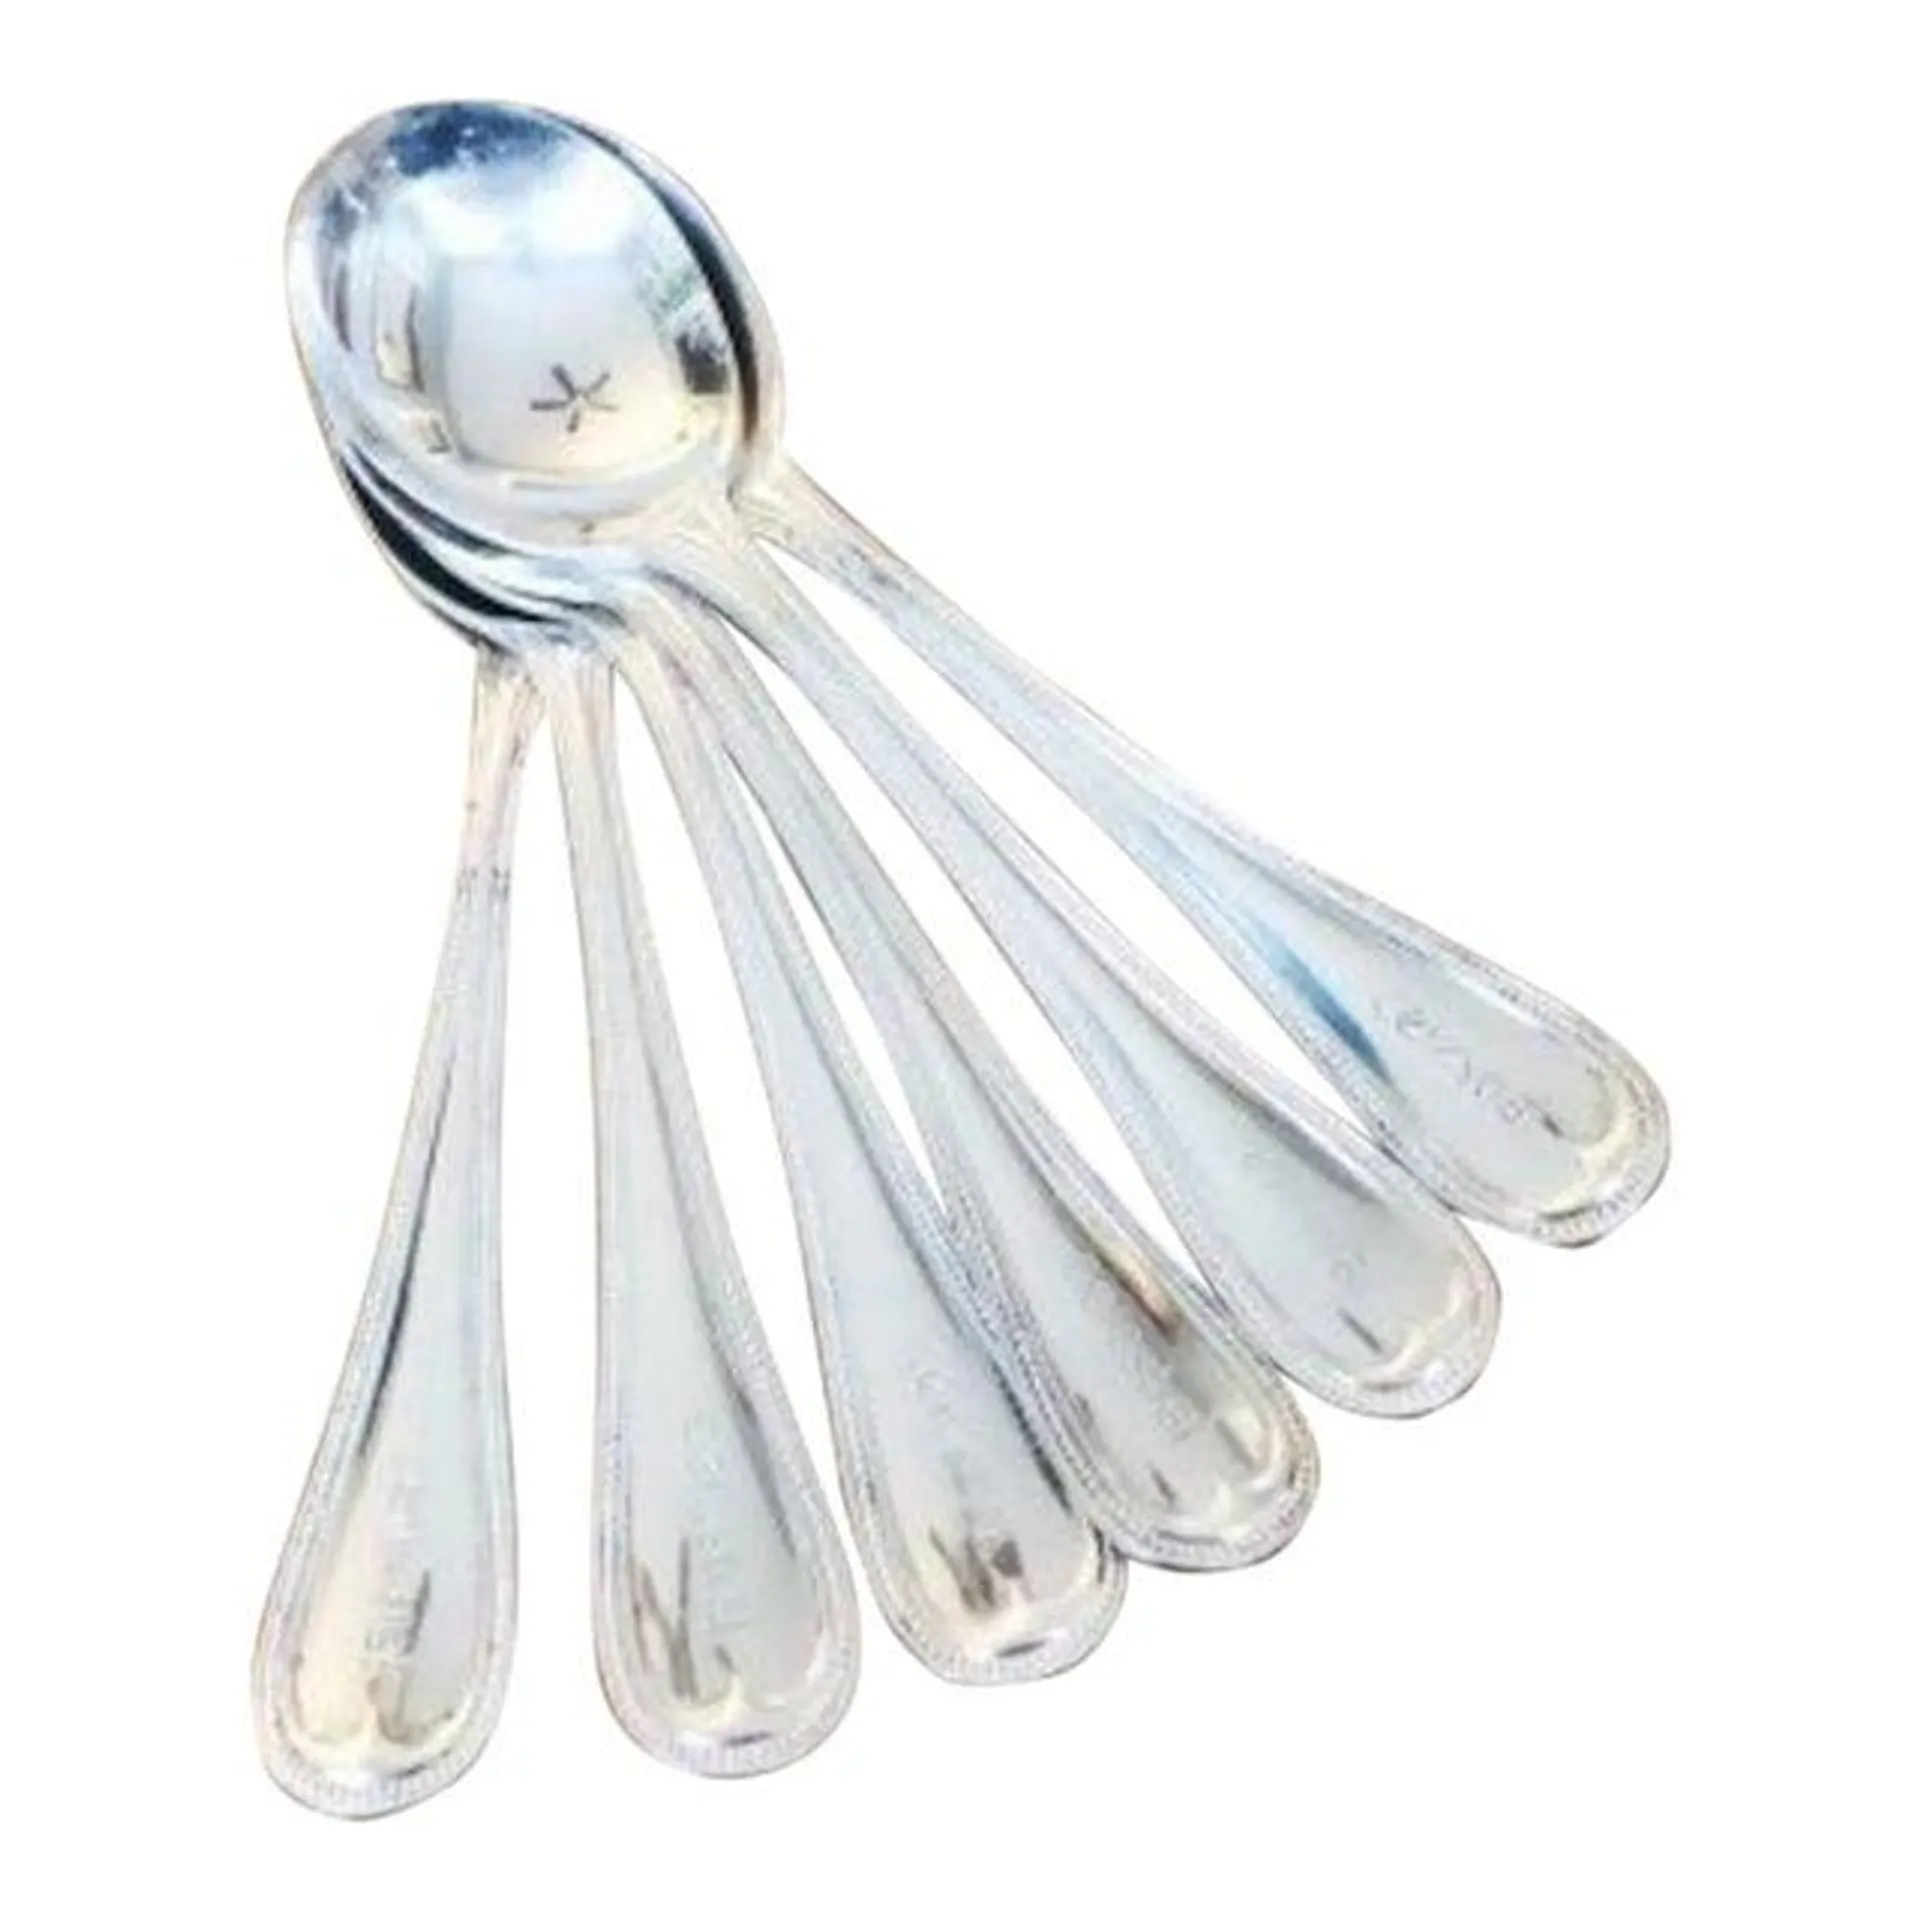 Celestial Steakhouse Silver Plated Soup Spoons - 6 Pieces